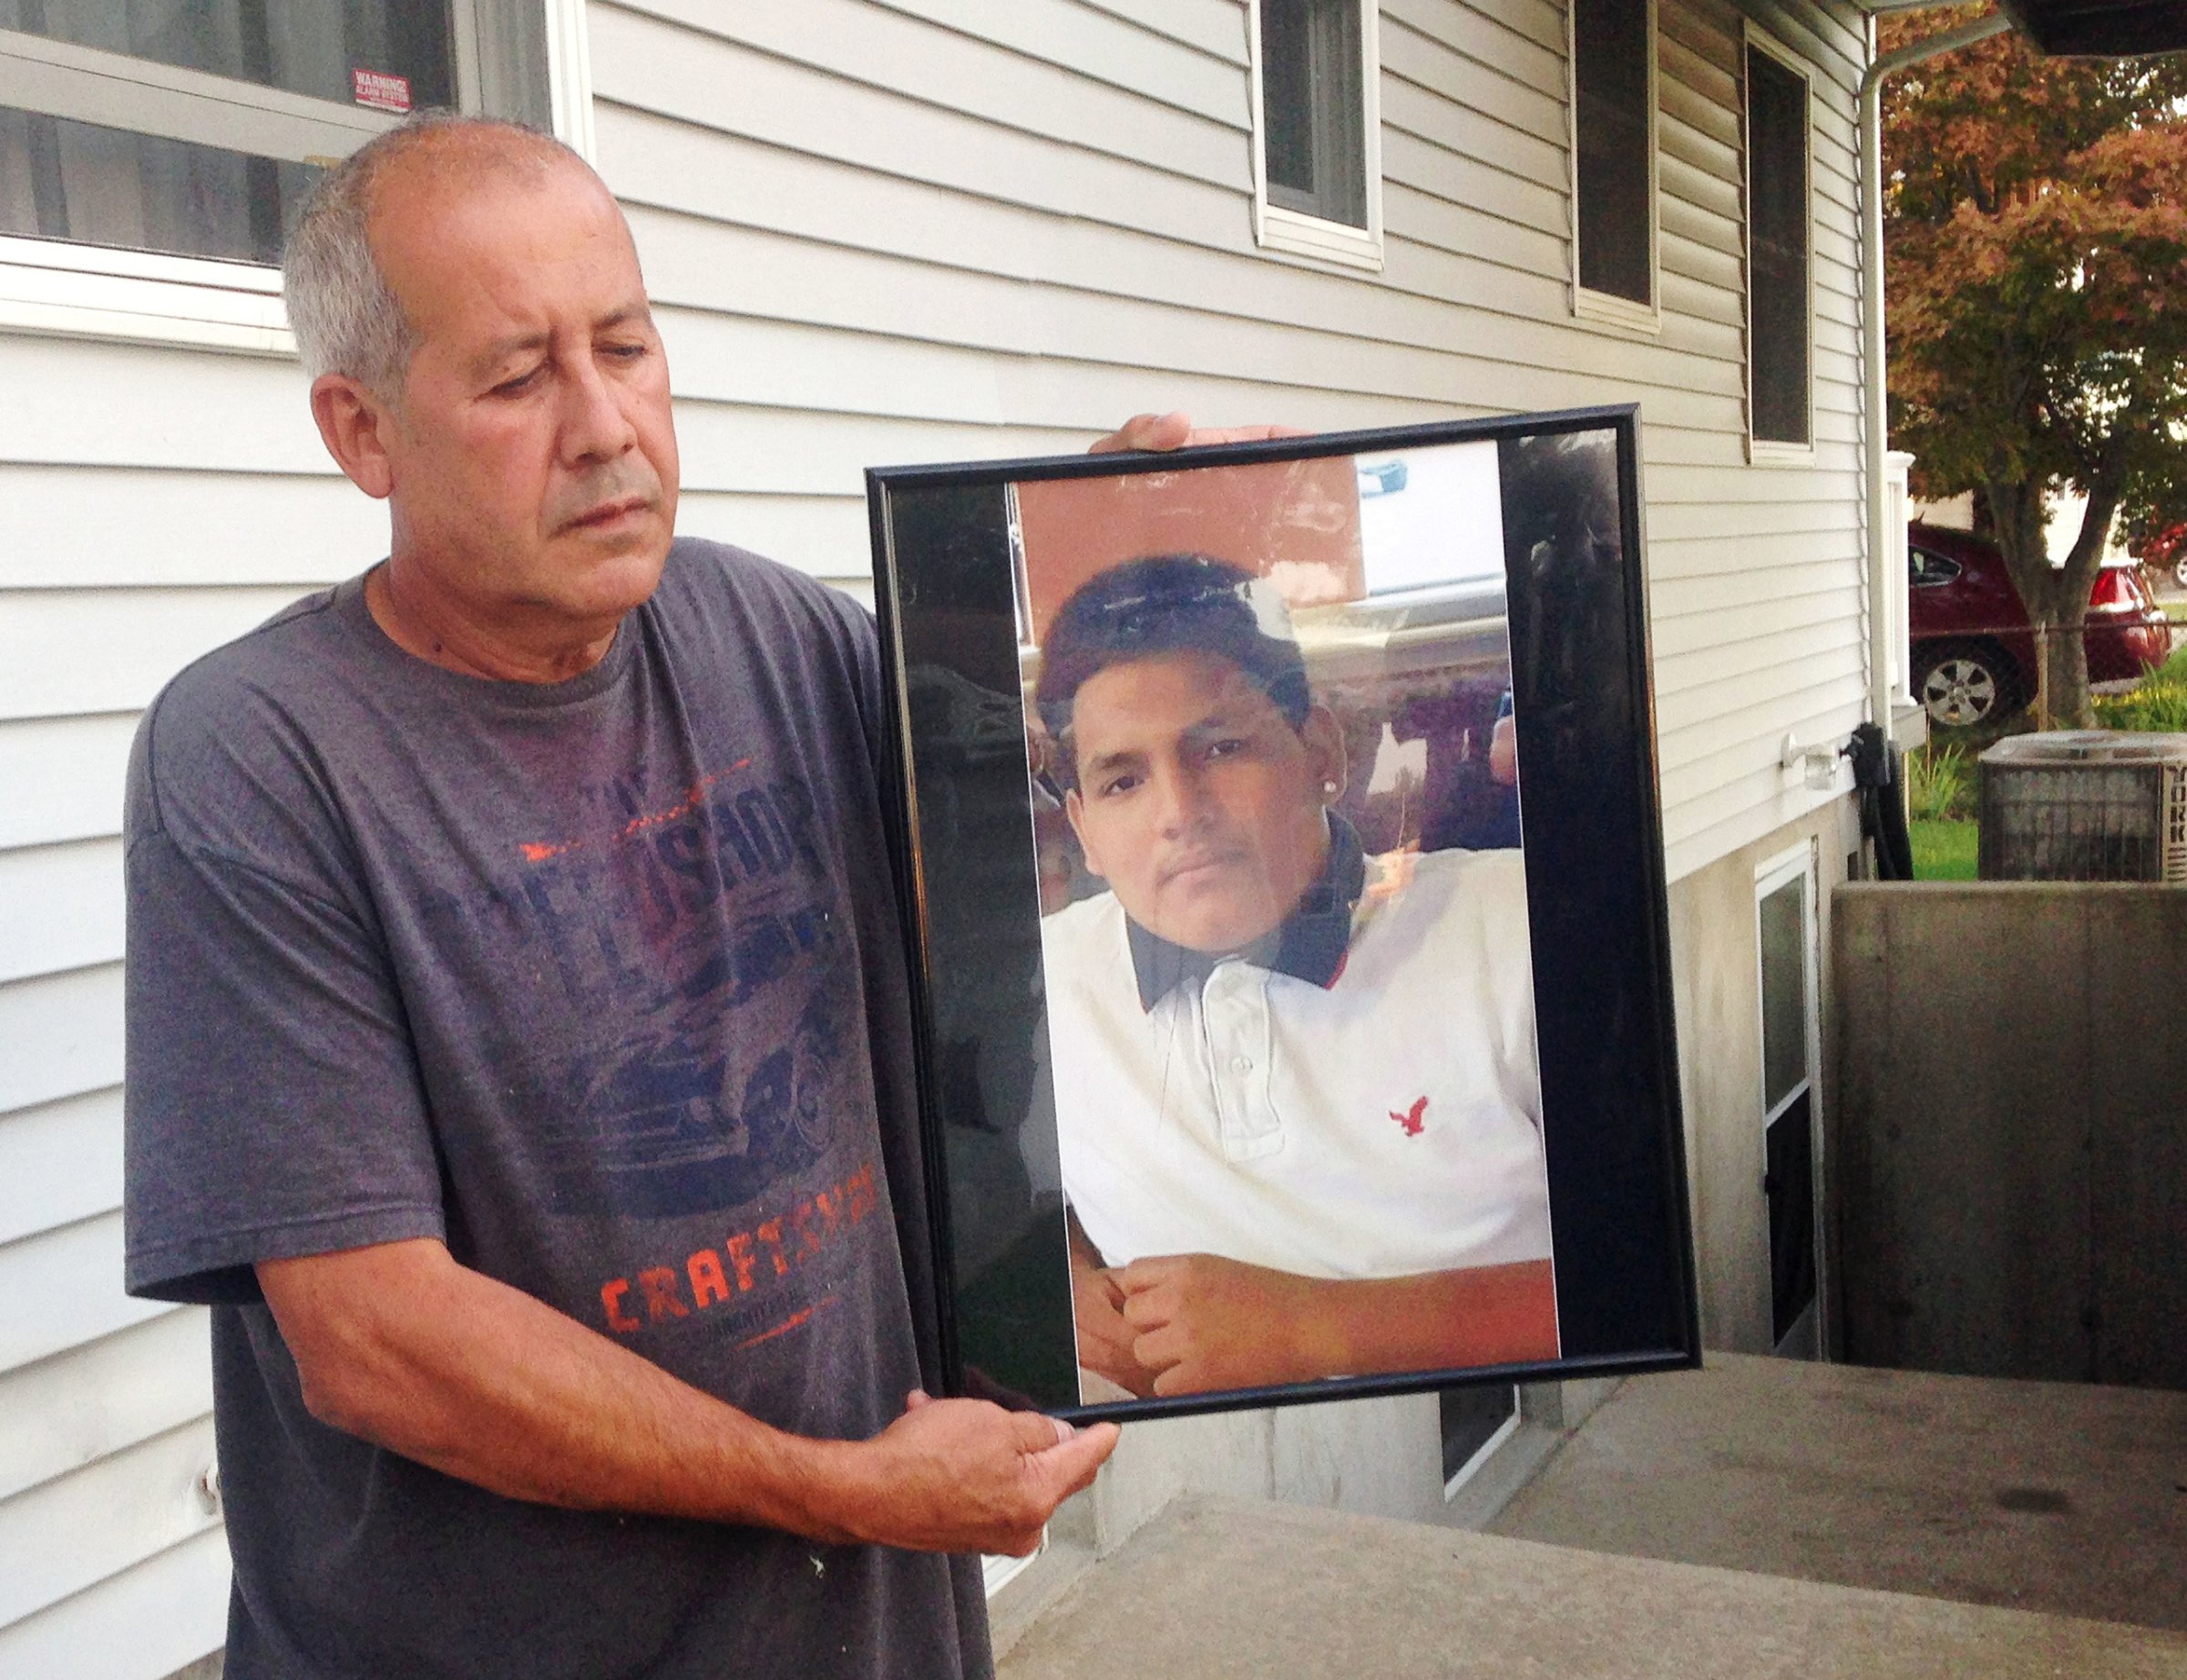 In this Sept. 27, 2016 photo, Abraham Chaparro, holds a photograph of his murdered stepson, Miguel Garcia-Moran, outside his home in Brentwood, N.Y. The remains of Garcia-Moran, who was reported missing in February, were found in September. Multiple teenagers from the same Long Island high school have been found dead and while police suspect all the deaths are related to gang violence, they are releasing few details. (AP Photo/Claudia Torrens)